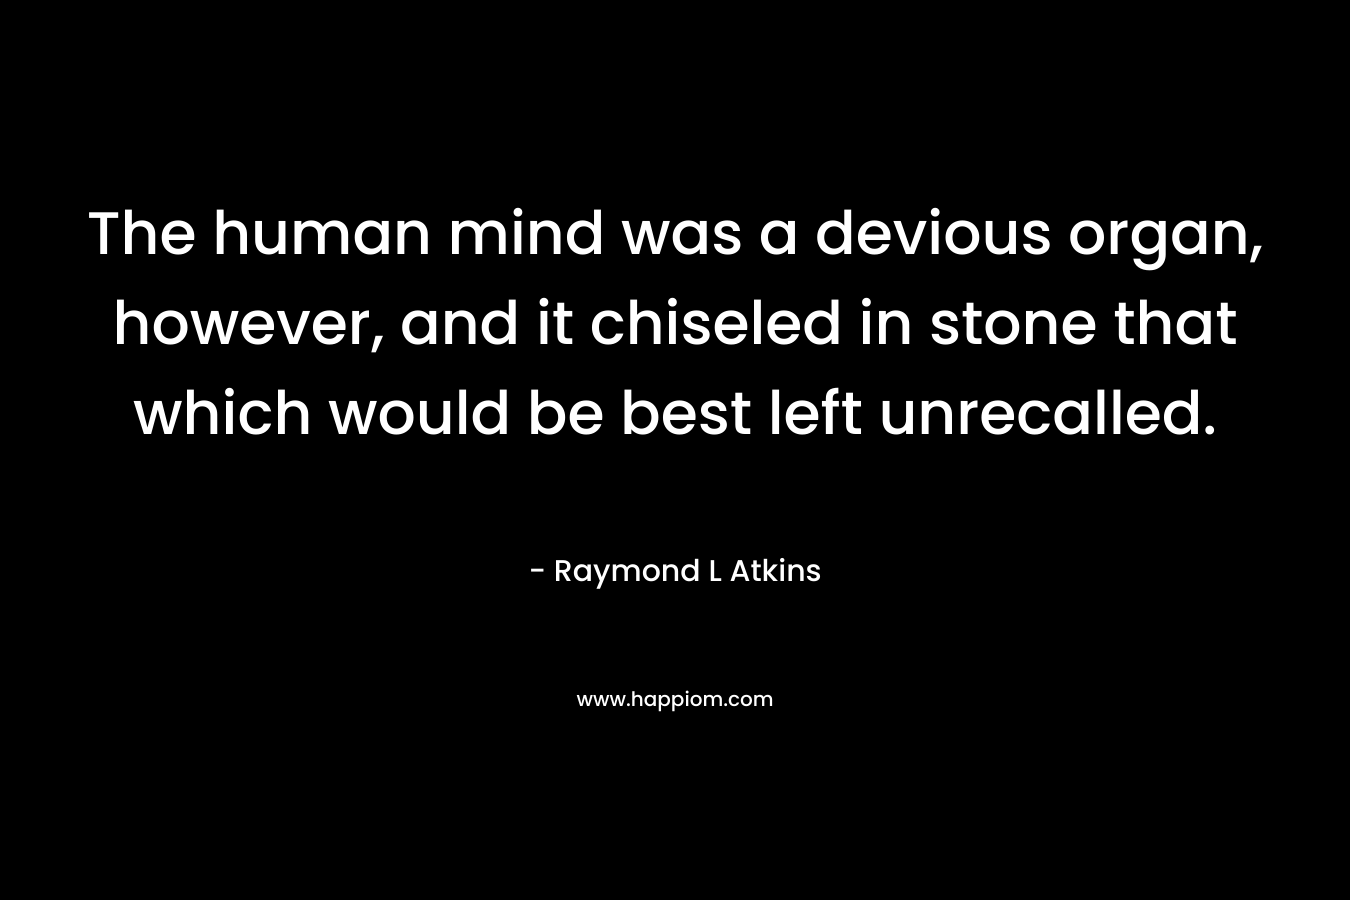 The human mind was a devious organ, however, and it chiseled in stone that which would be best left unrecalled.